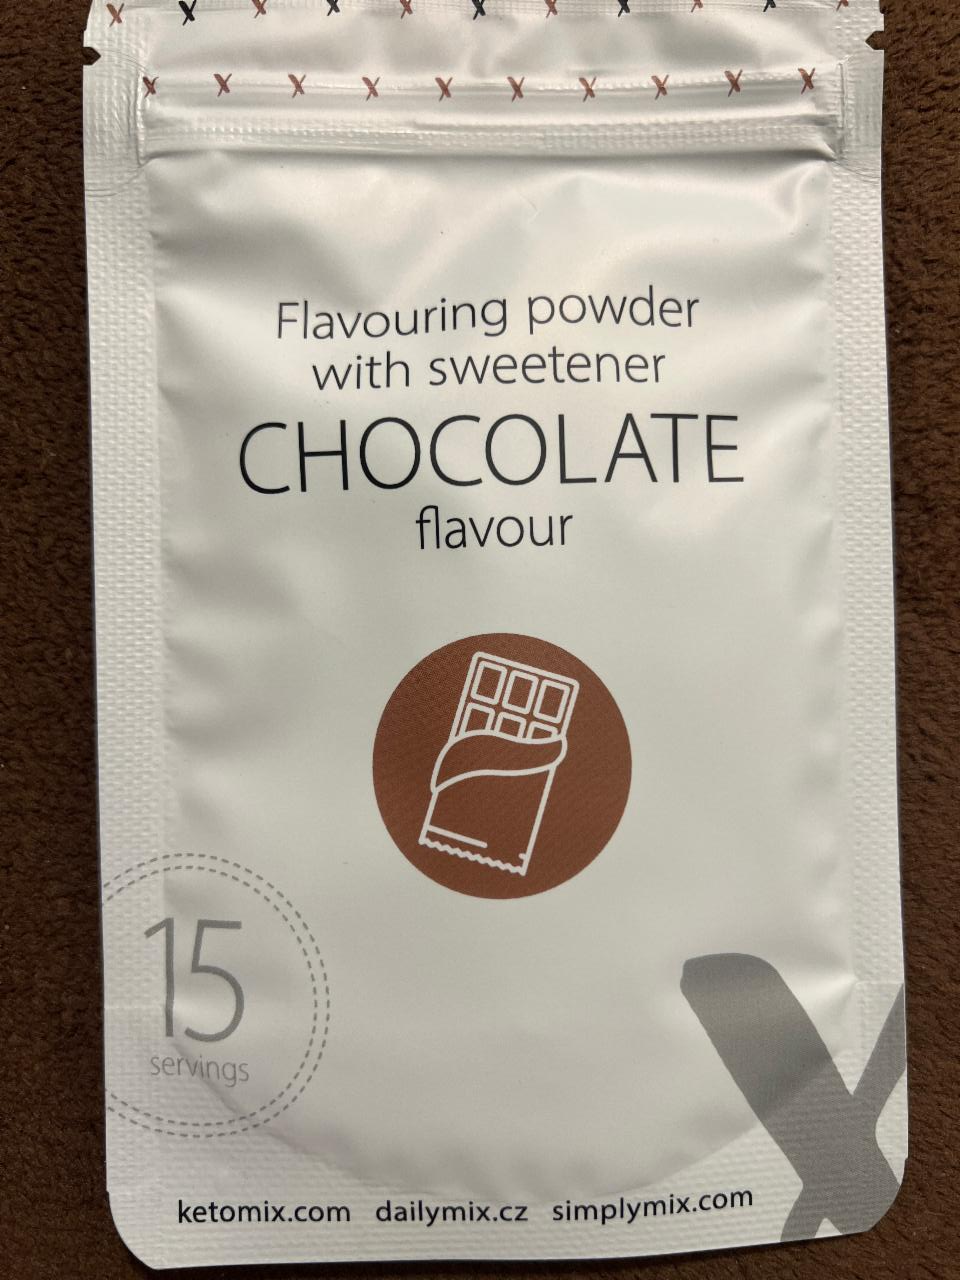 Fotografie - Flavouring powder with sweetener Chocolate flavour